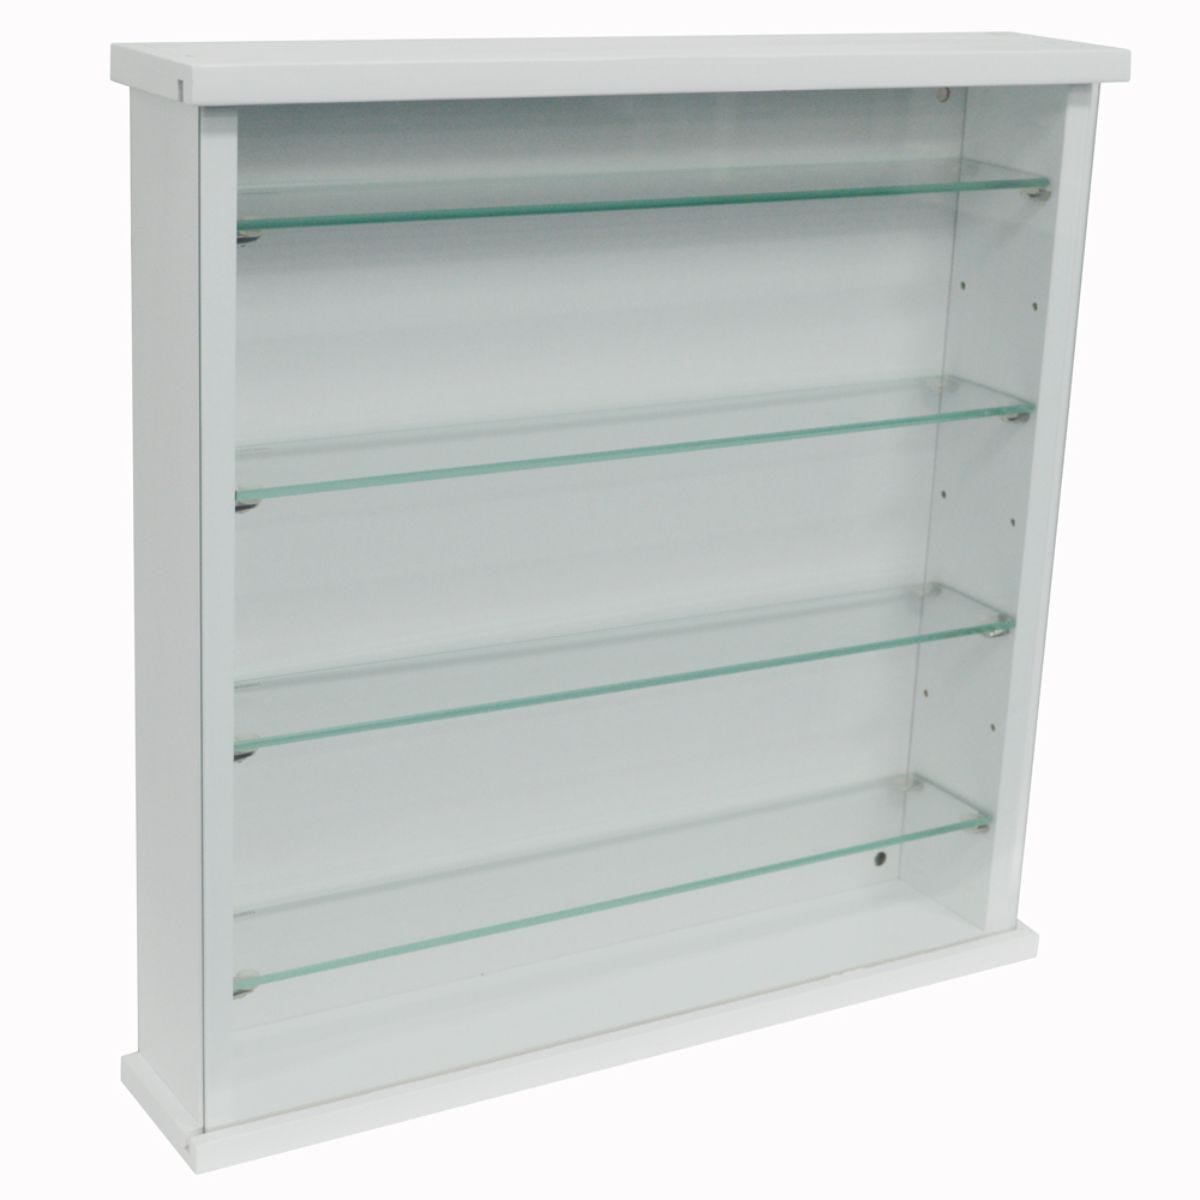 Techstyle Exhibit Wood 4 Shelf Glass Wall Display Cabinet White